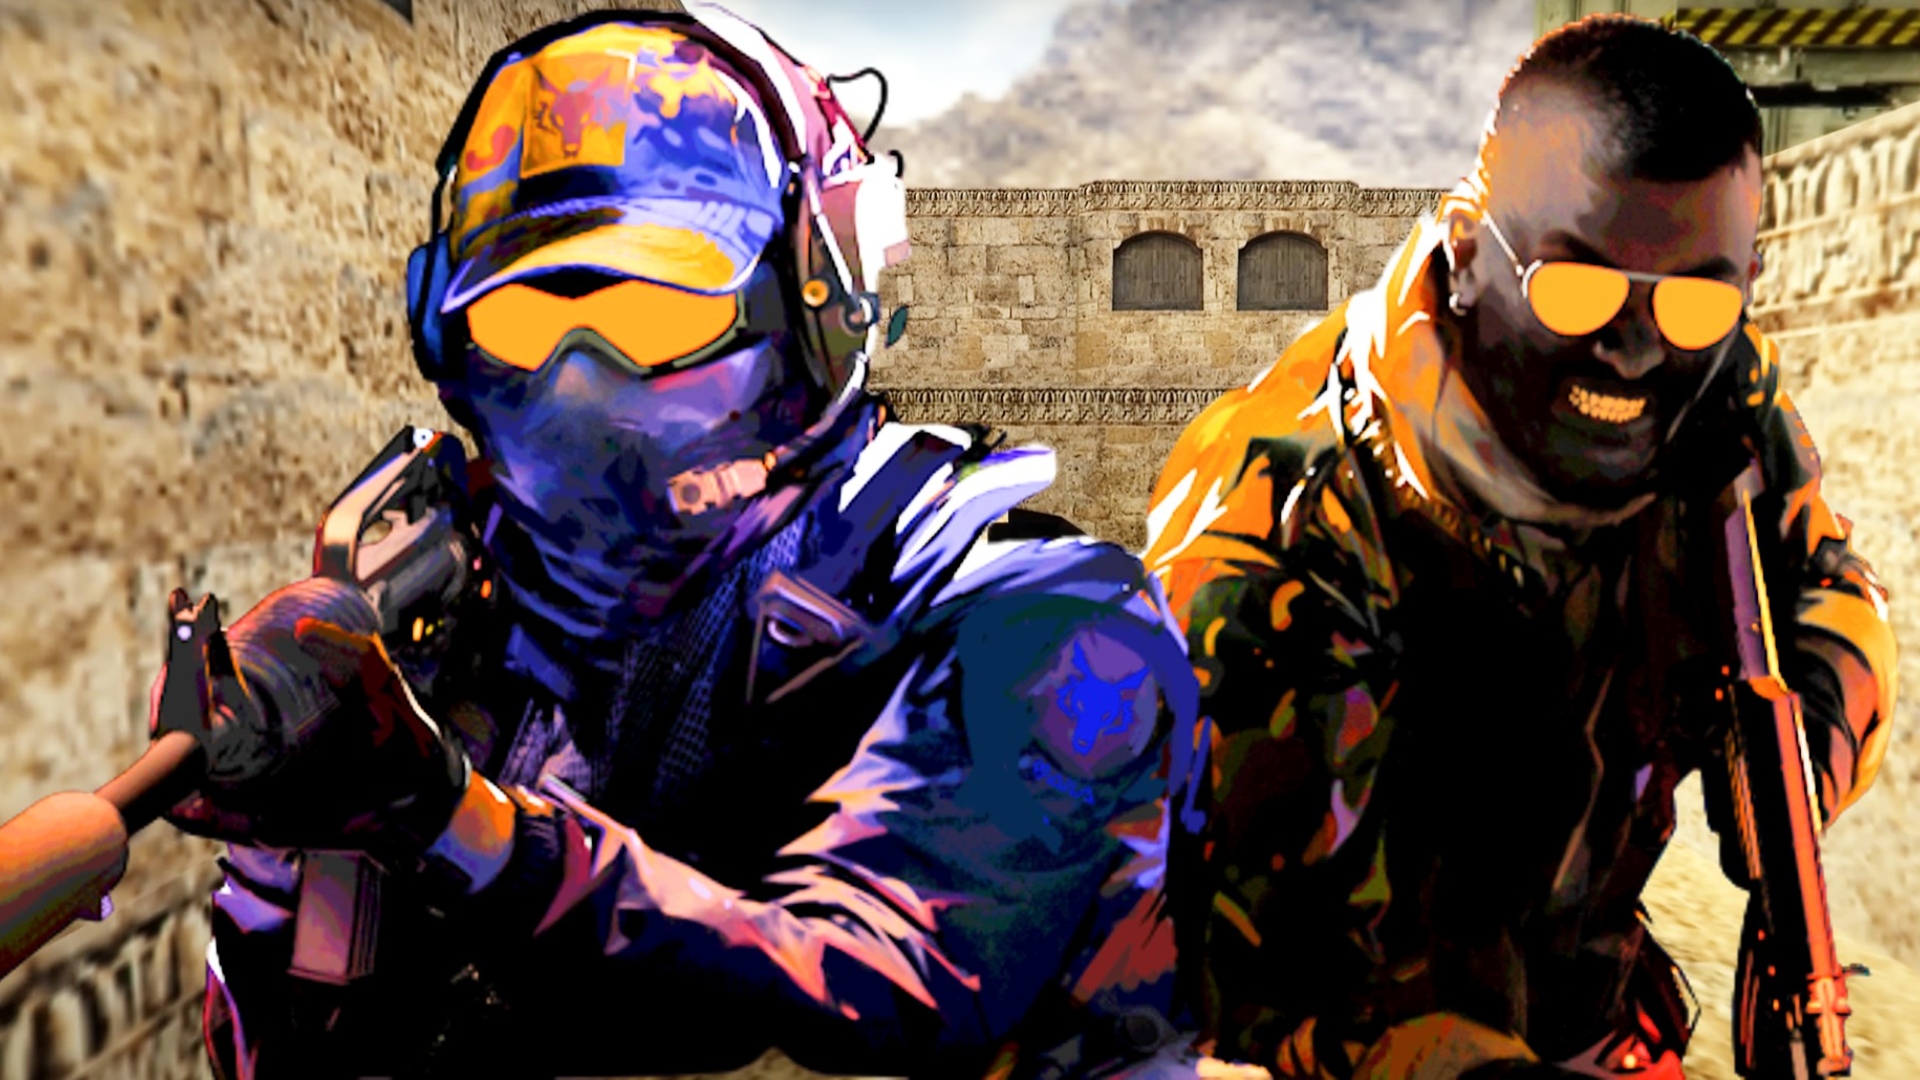 Counter-Strike 2 is finally here, as Valve bids farewell to CSGO